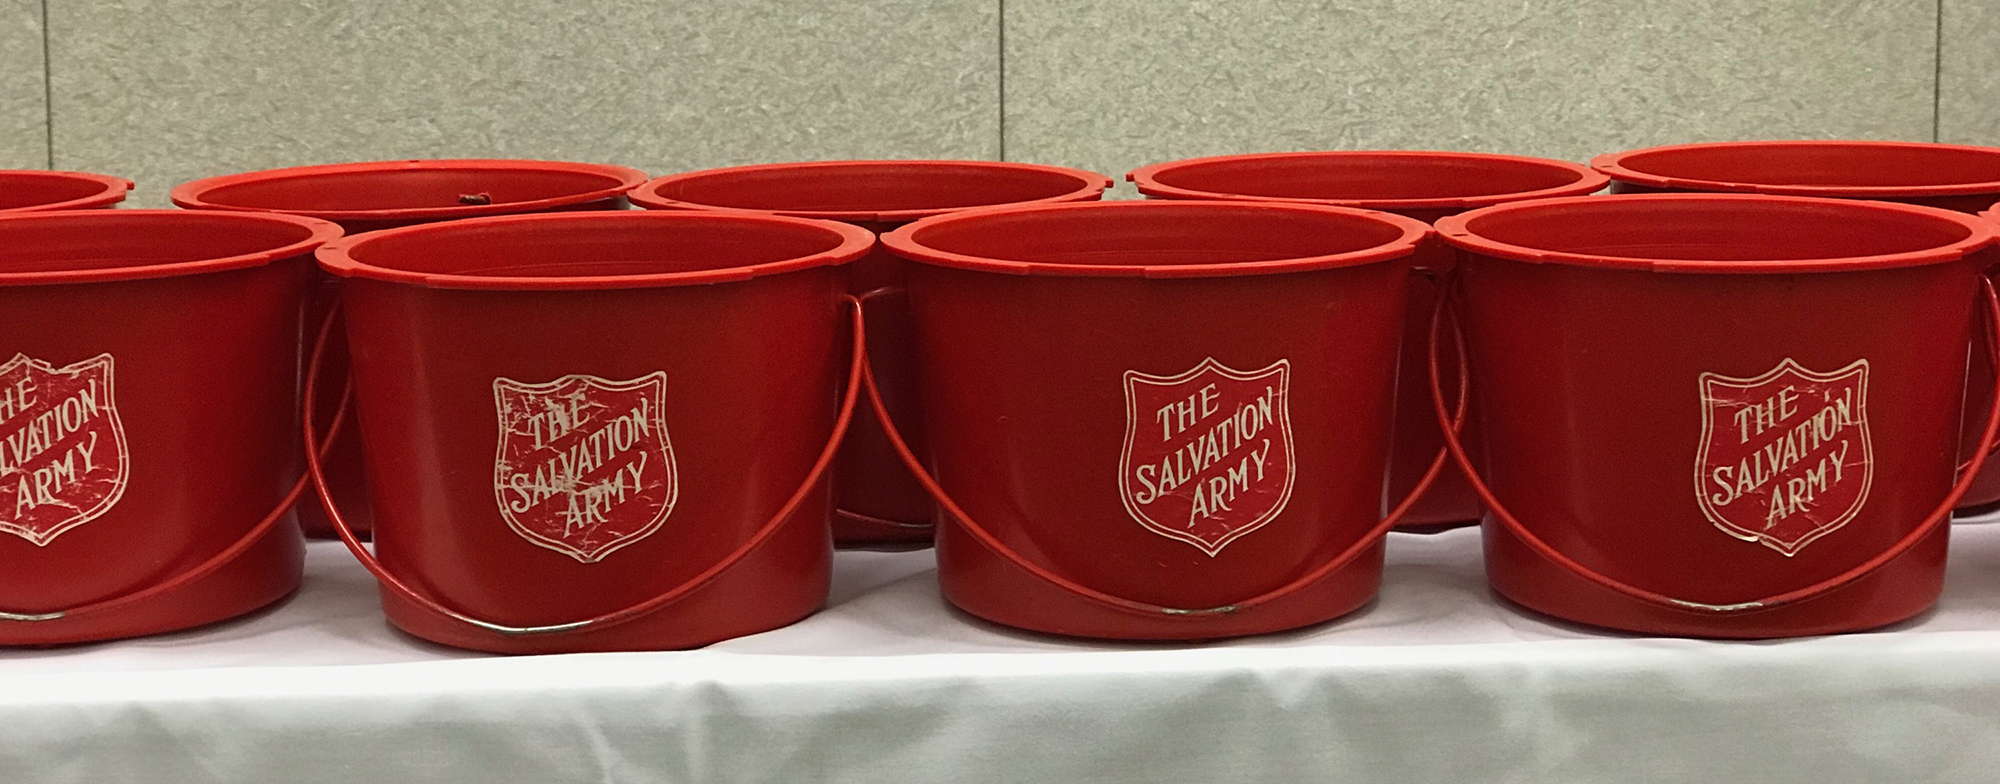 IUCU helps count cash at the 2017 Salvation Army Kettle Kickoff event